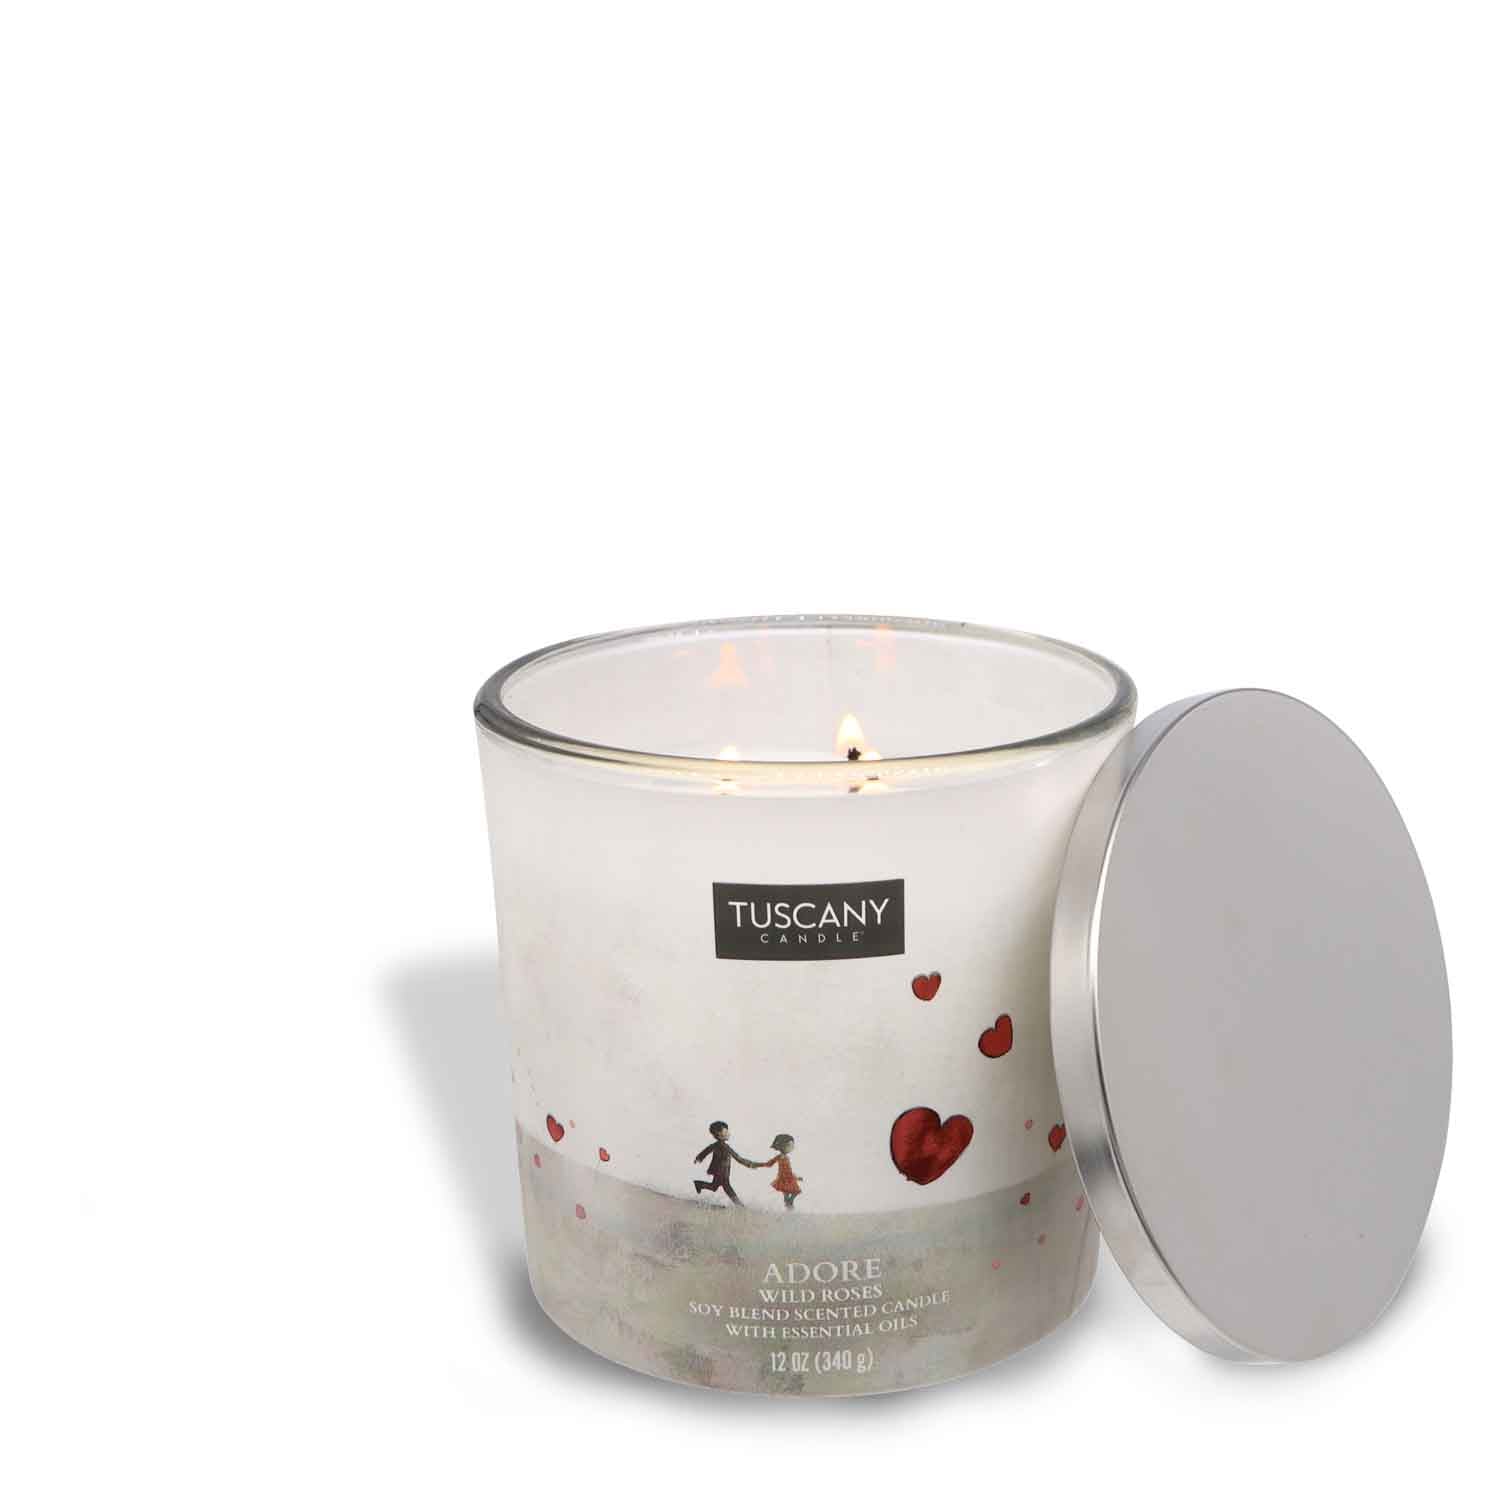 A Adore Scented Jar Candle (12 oz) from the Carried Away collection adorned with a delicate heart on its lid, exuding floral elegance.